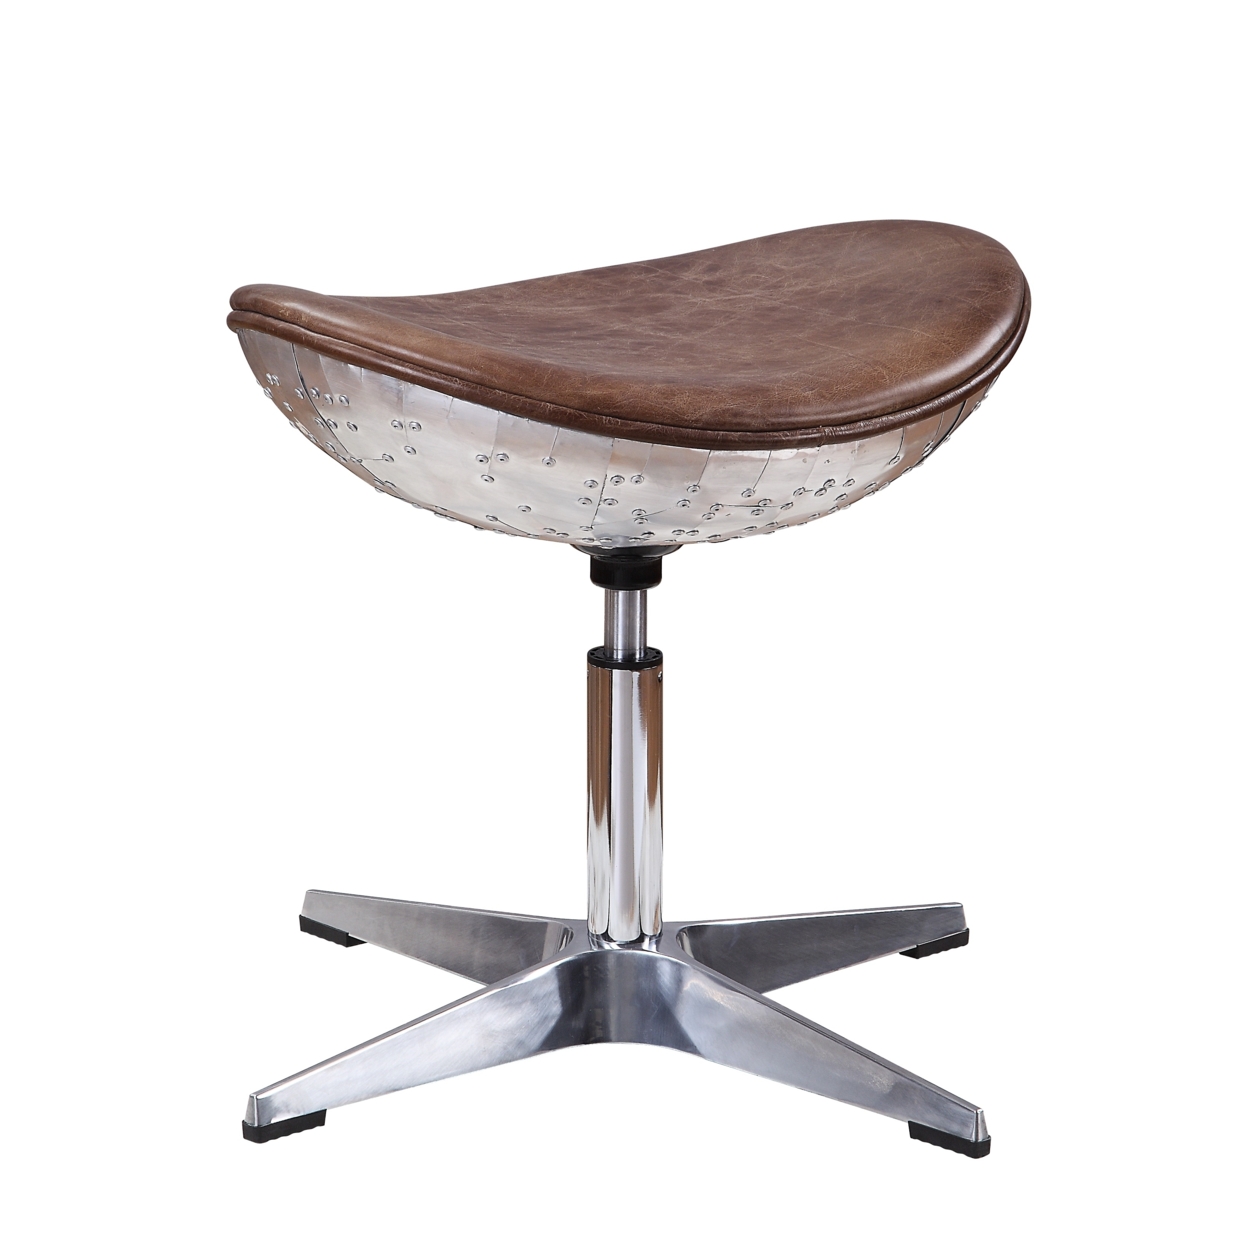 Faux Leather Upholstered Aluminum Stool With Curved Seating, Brown- Saltoro Sherpi